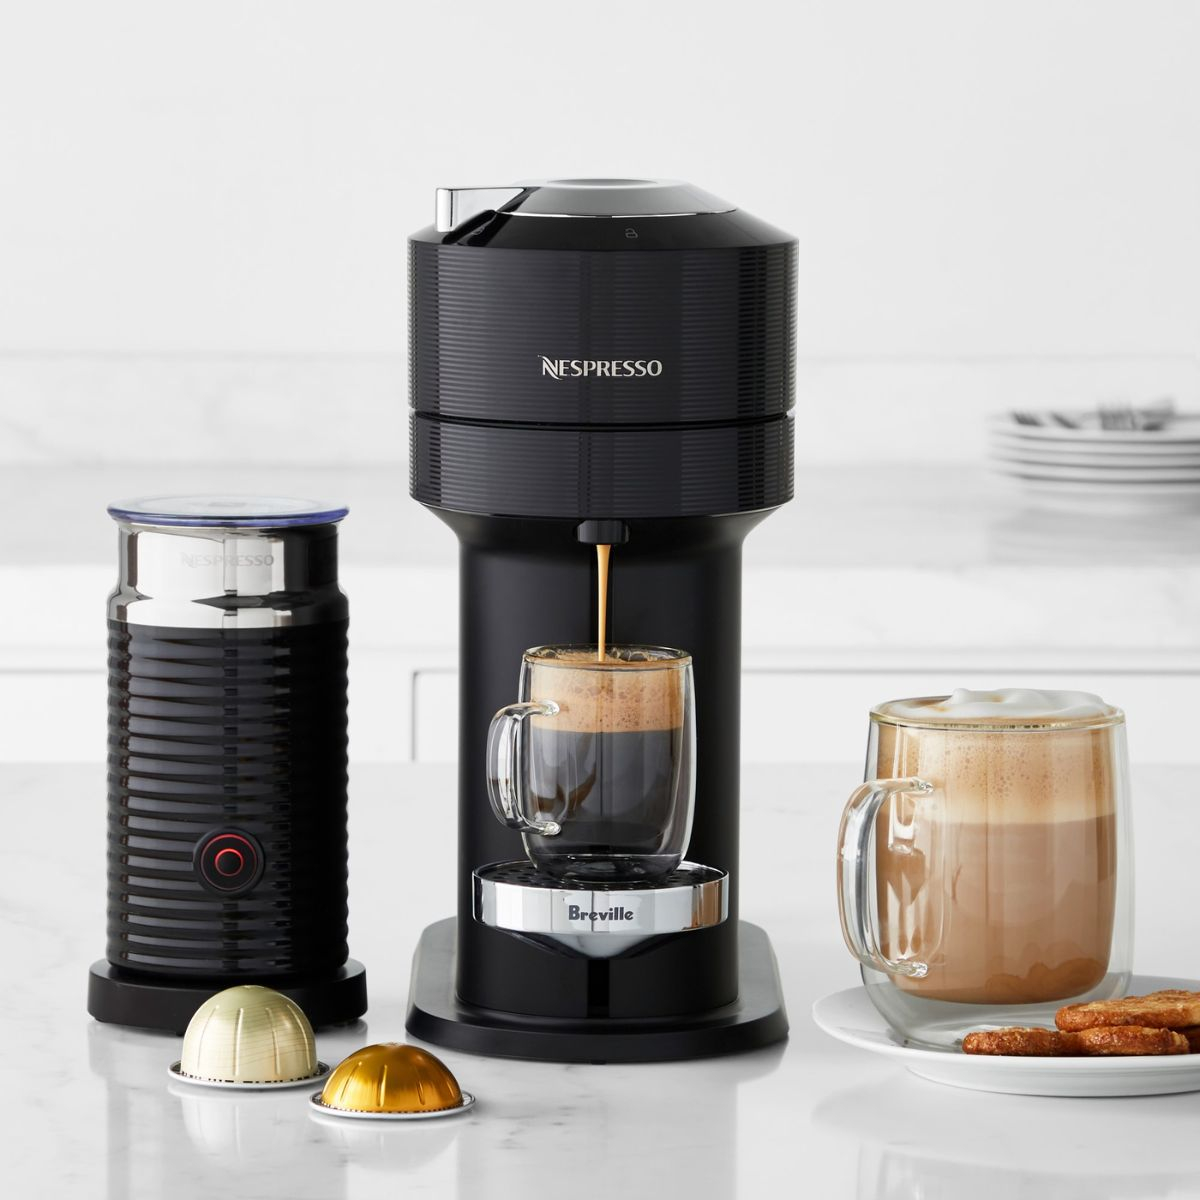 Nespresso Aeroccino 4: Convenient Milk Frother for Coffee Lovers